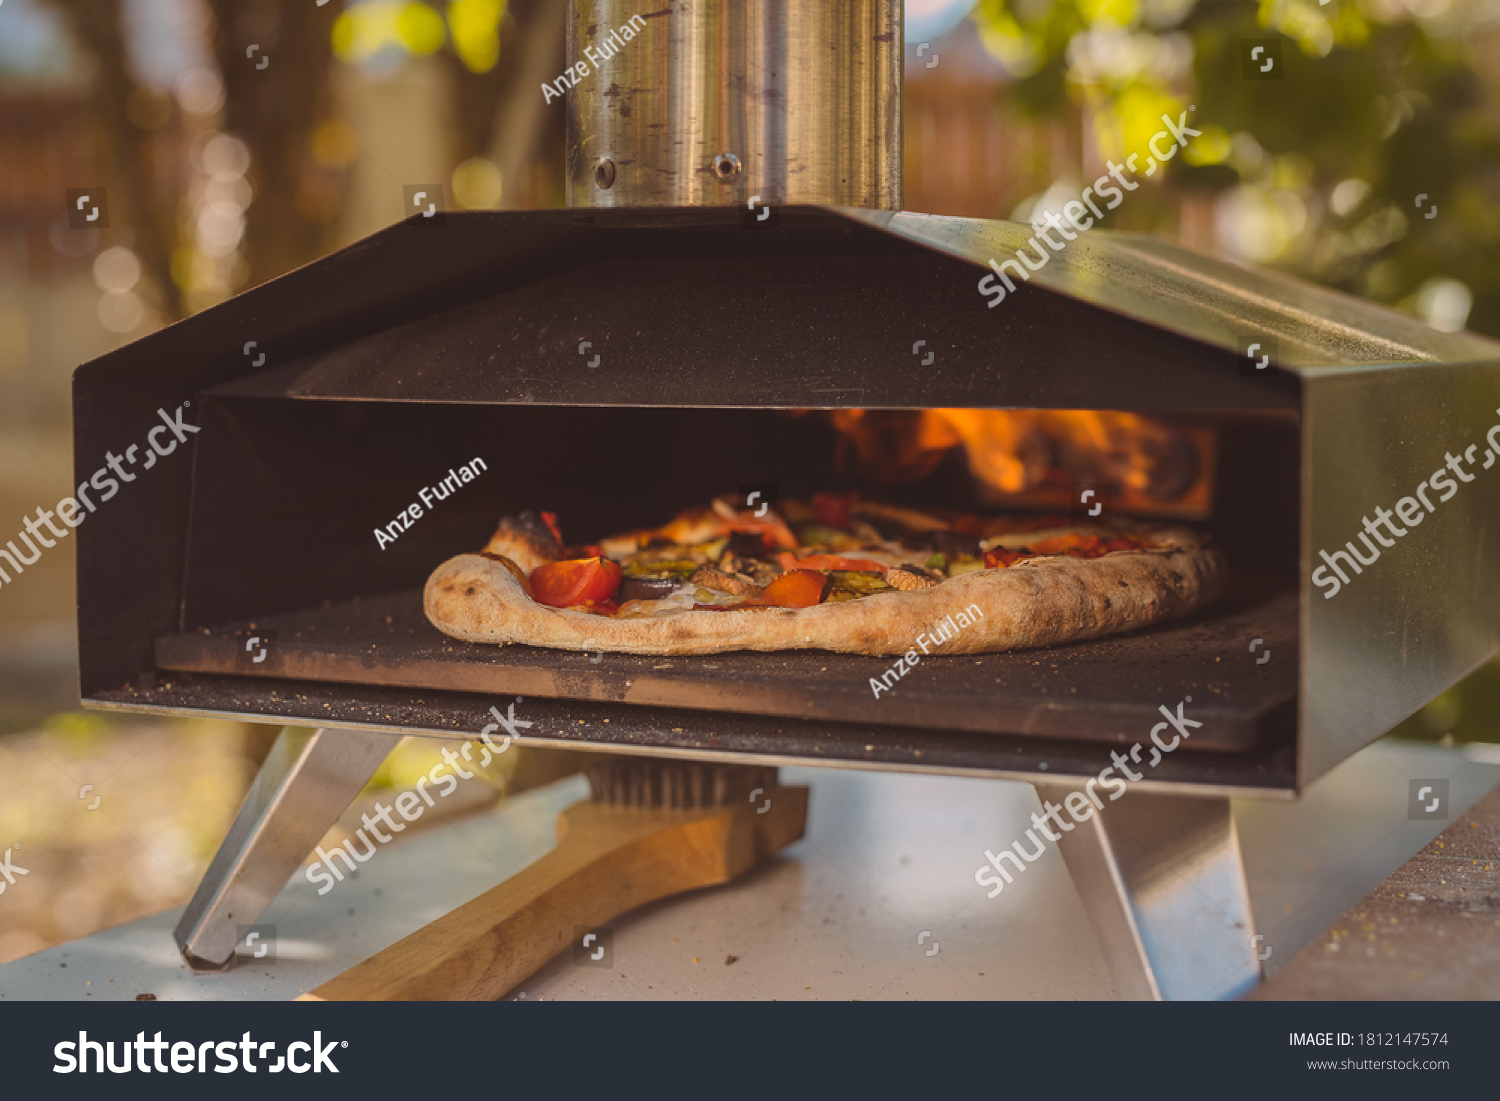 Home made pizza is inserted in a portable aluminium home oven for pizzas. Delicious pizza is baking in an oven, visible fire in the back of the furnace. #1812147574